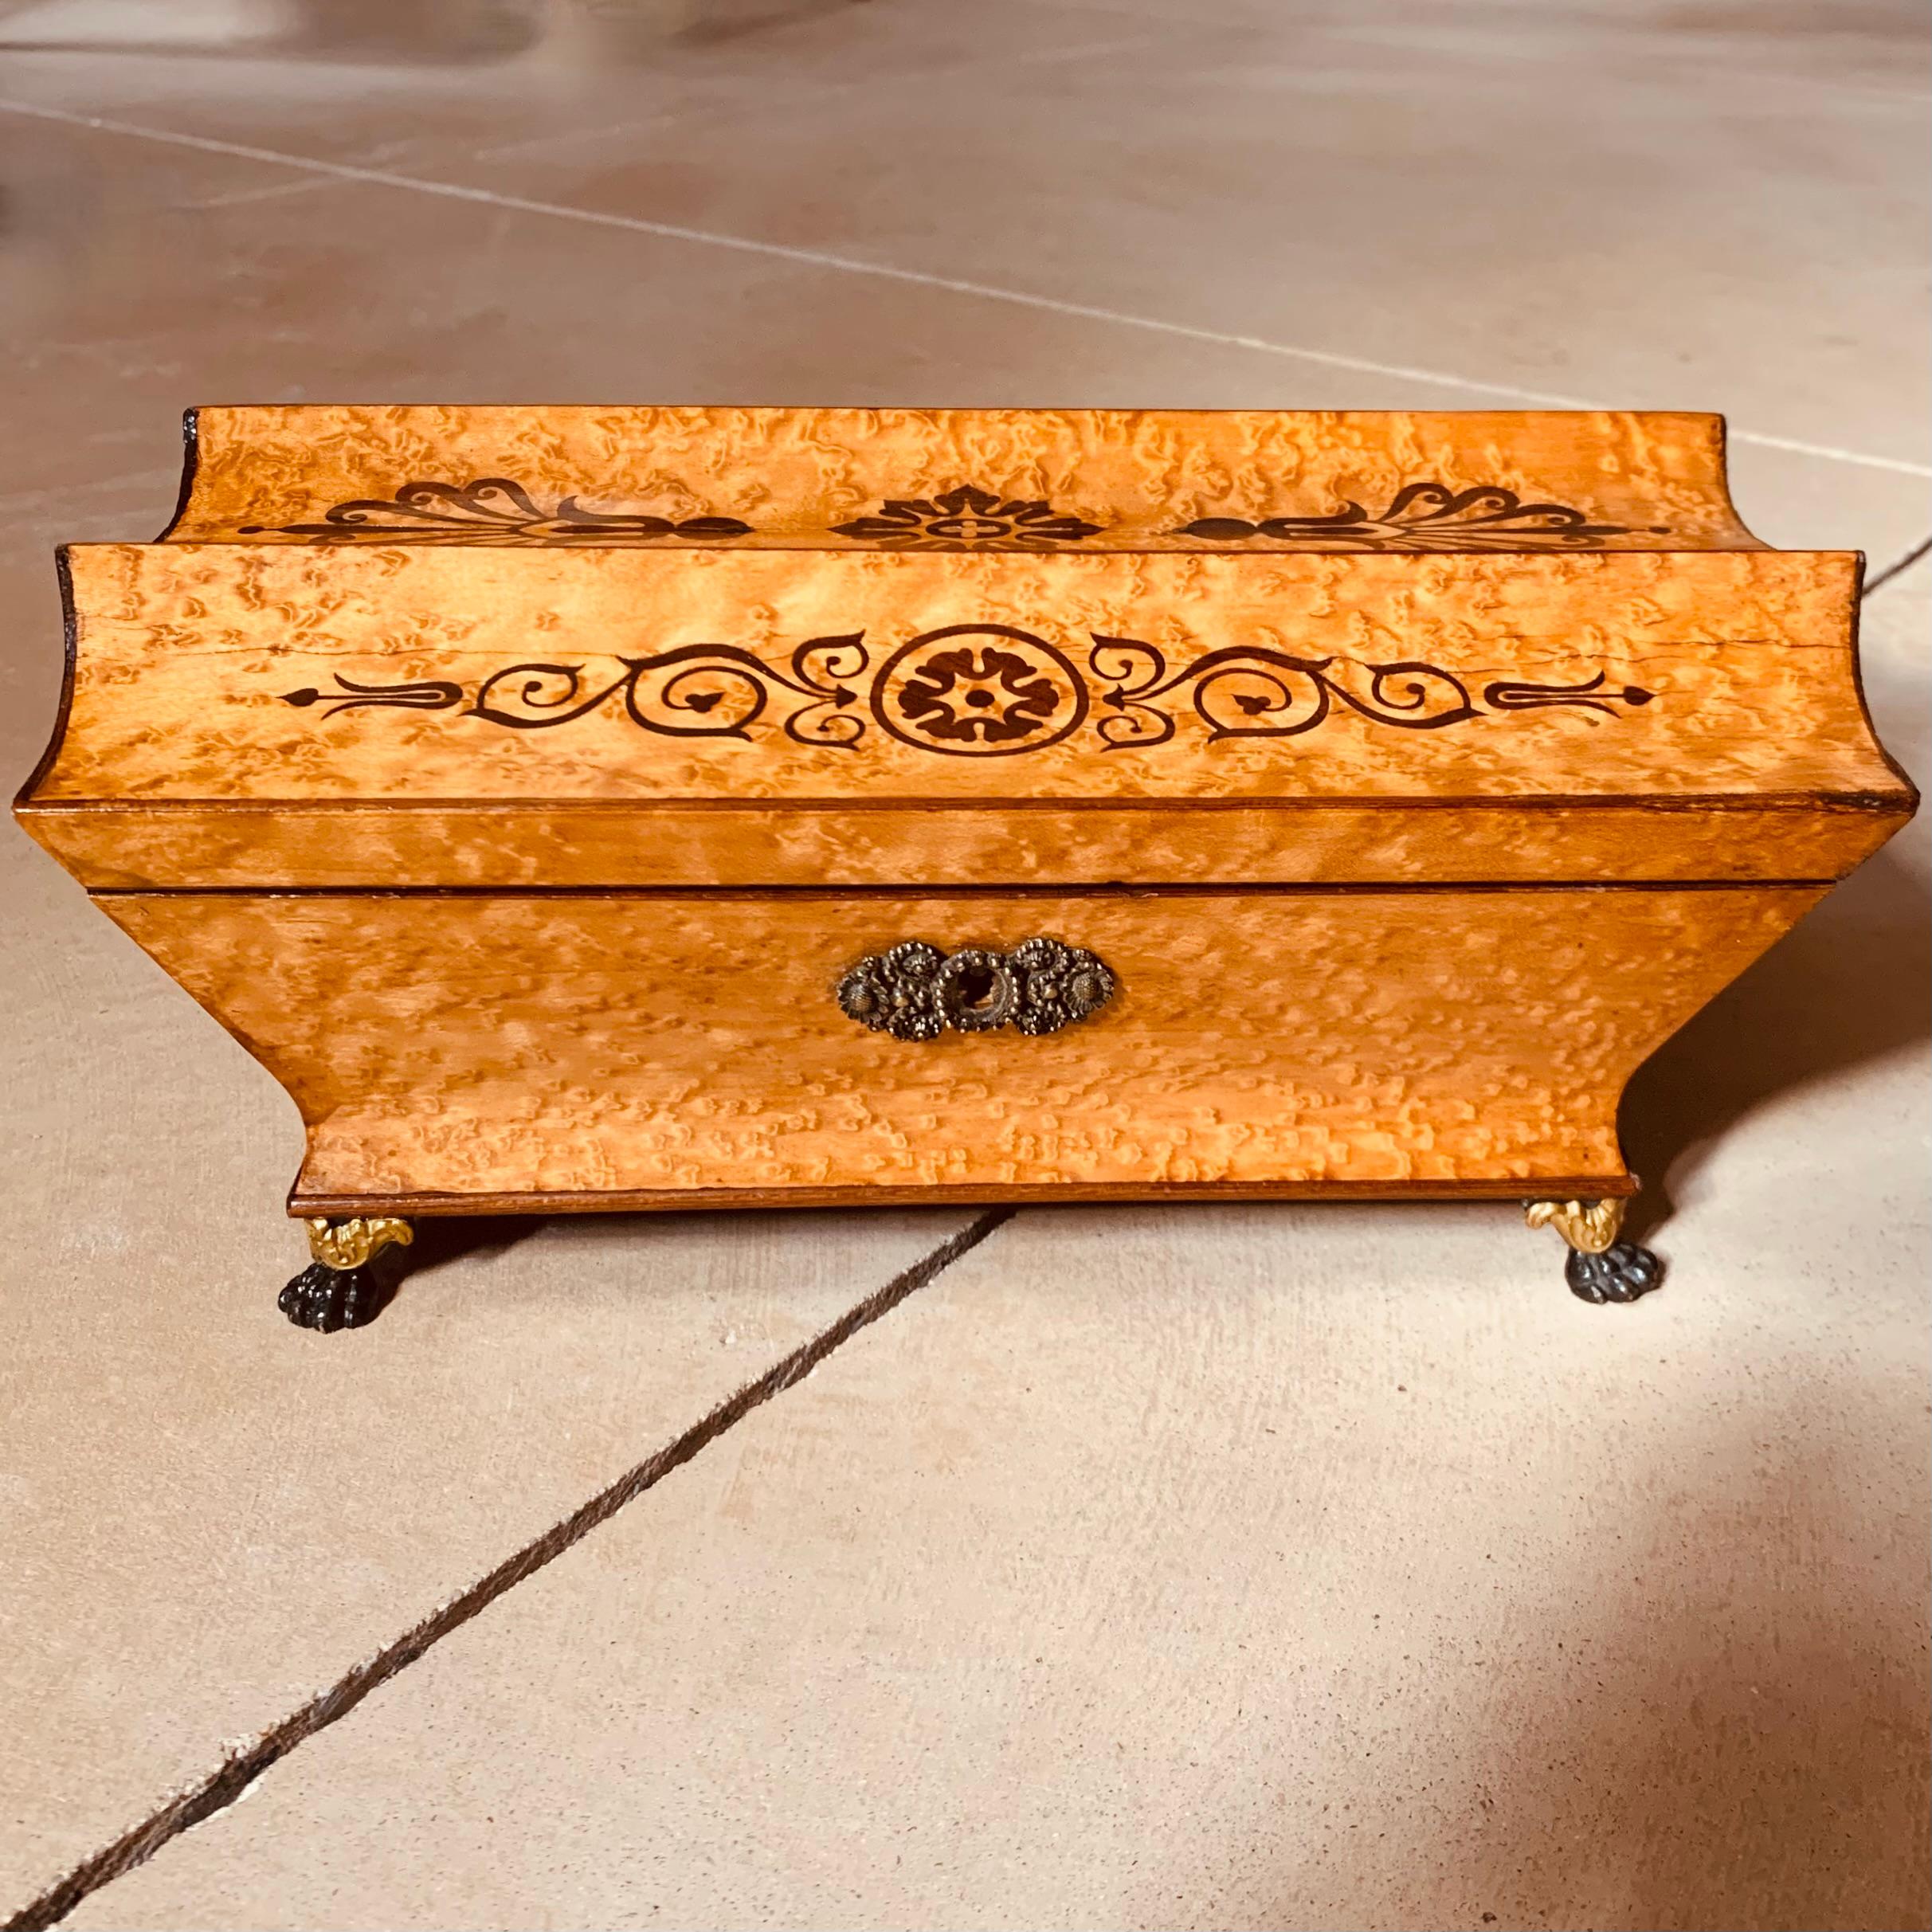 A very fine and exquisitely grained bird’s eye maple box of unusual form: the top curved into three concave channels, each one inlaid with contrasting anthemion and rosette designs. The interior is lined in cream silk with blue marbleized paper